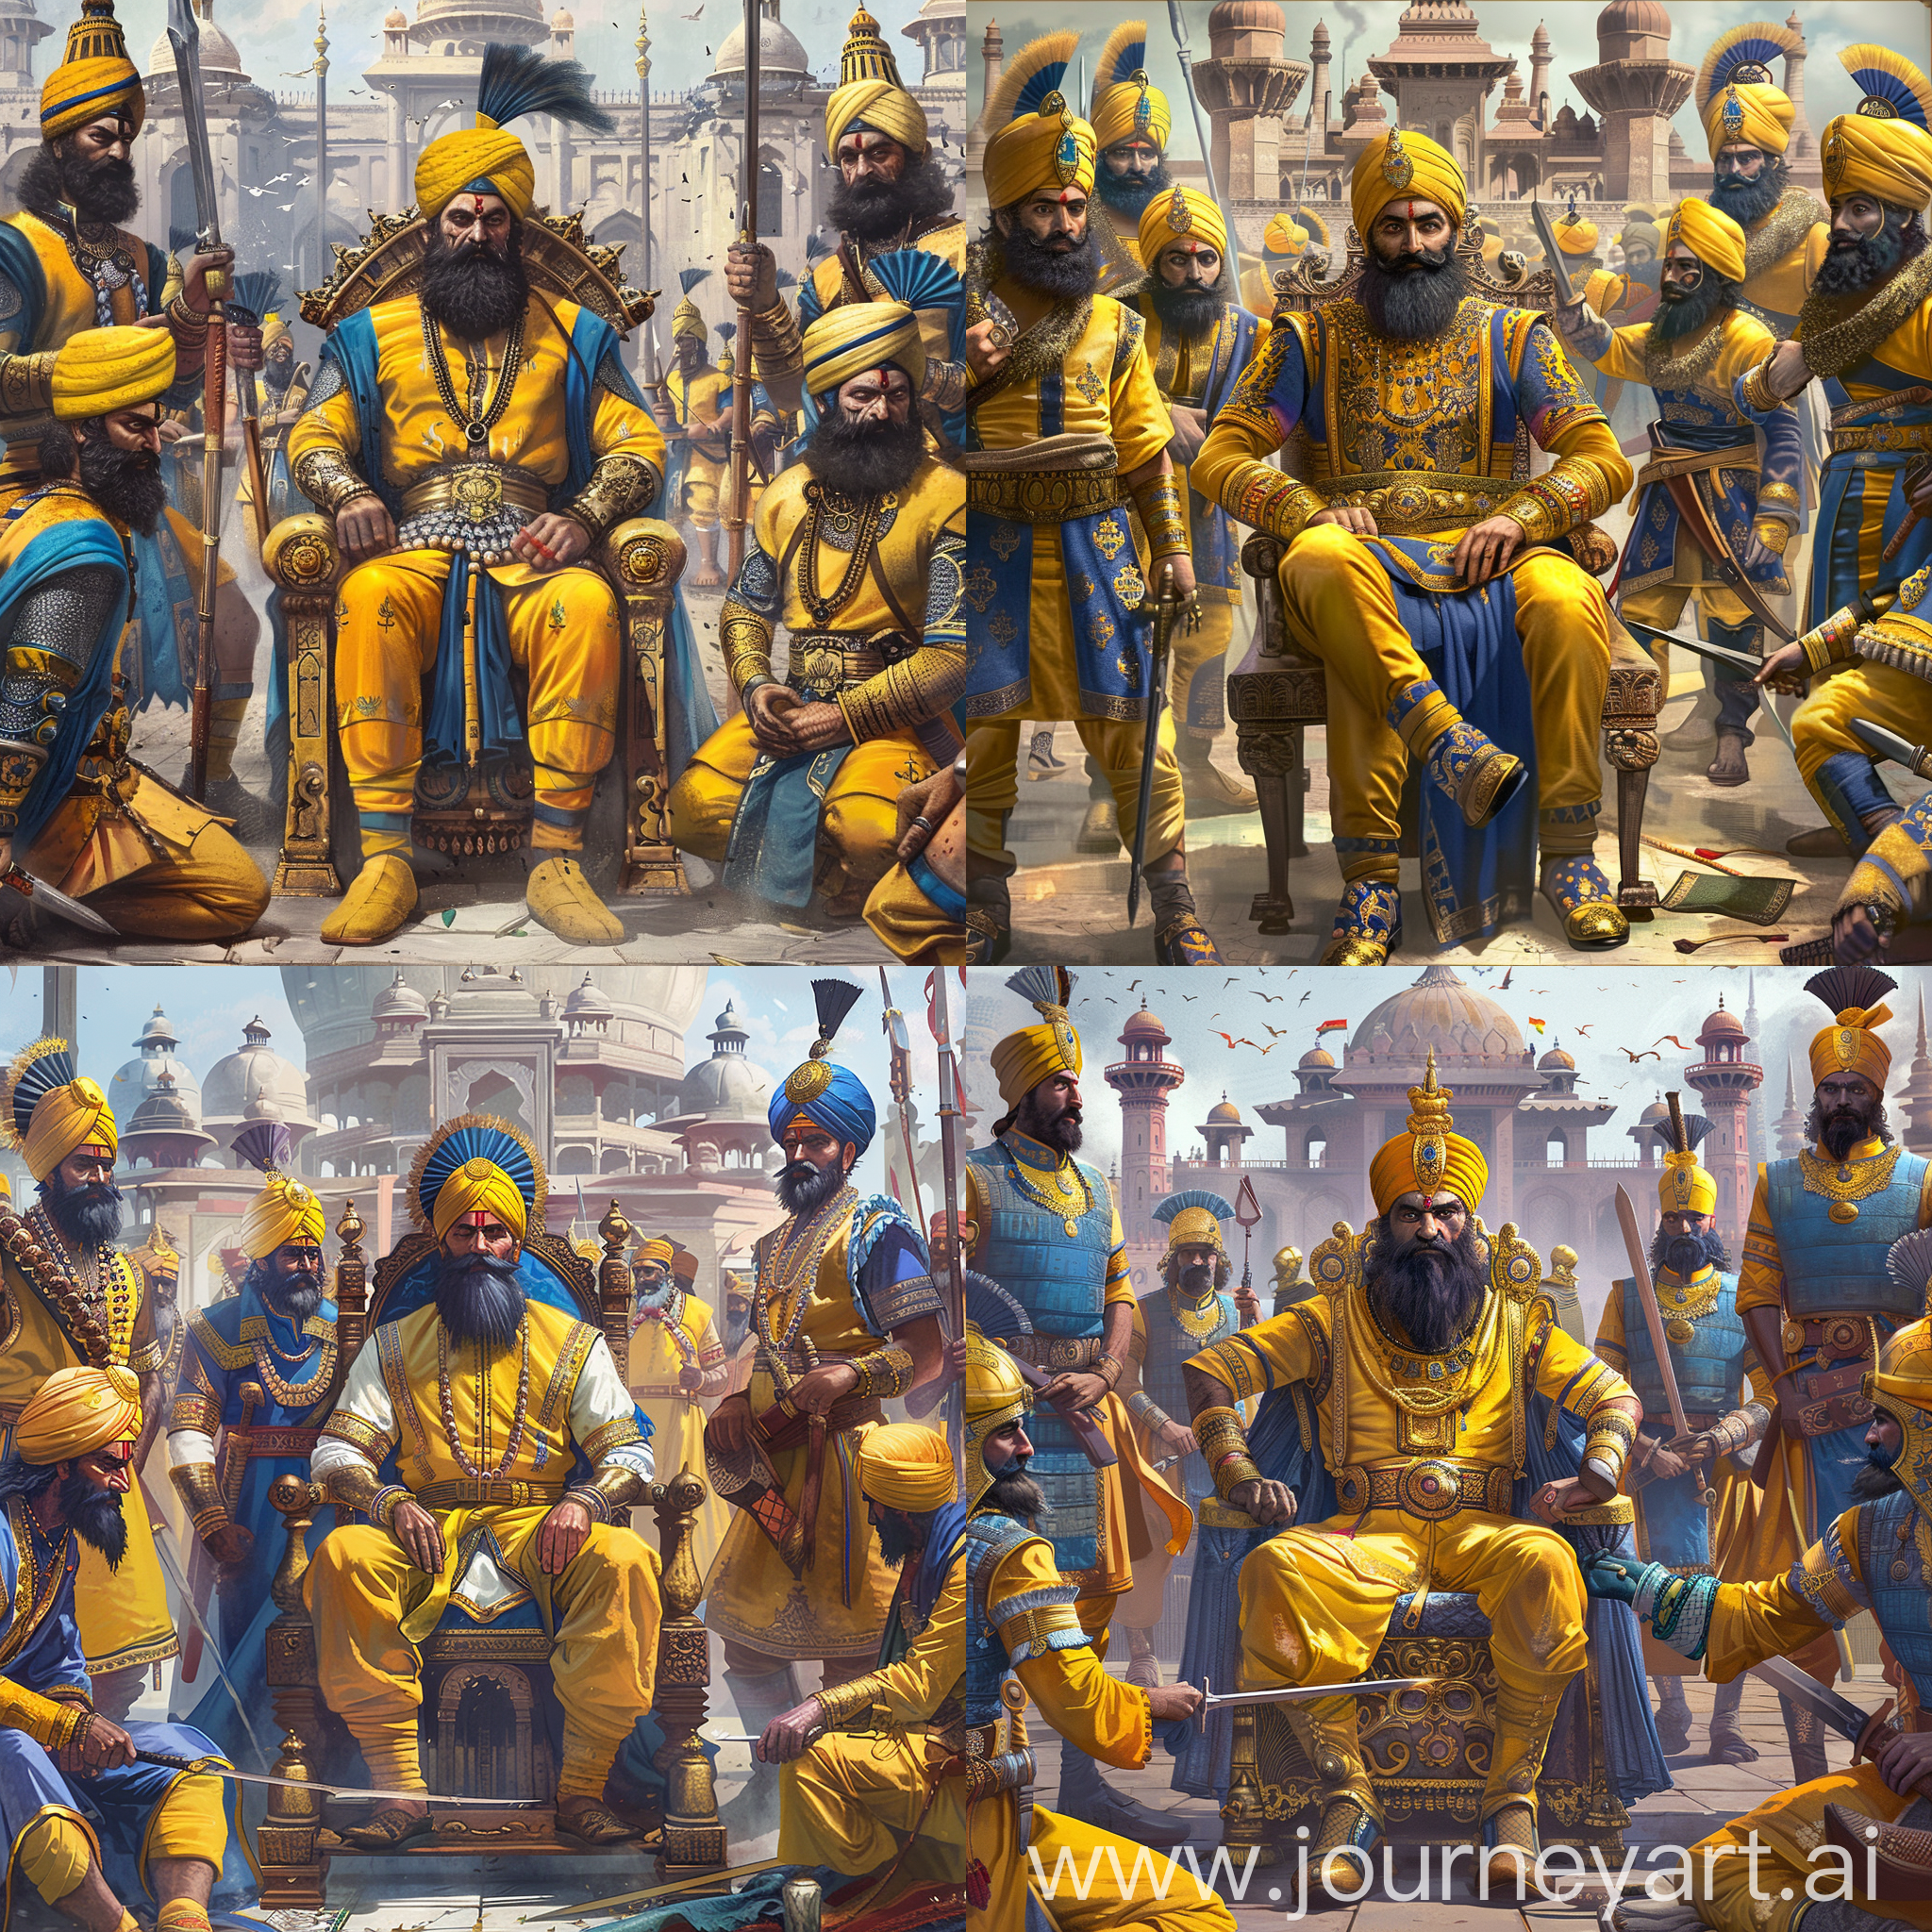 a middle-aged Indian emperor Mughal Babur is sitting on his imperial throne in the middle, he has black Indian style beard, yellow-blue ancient hat and costume, with shoes,

other Indian Mughal warriors are in yellow and blue color armor, they hold swords or spears in hands, they have Indian Mughal hat and black beard, they stand around the emperor, with shoes,

they are all before an medieval Indian palace like Mughal Harem, other ancient medieval Indian temples as background,